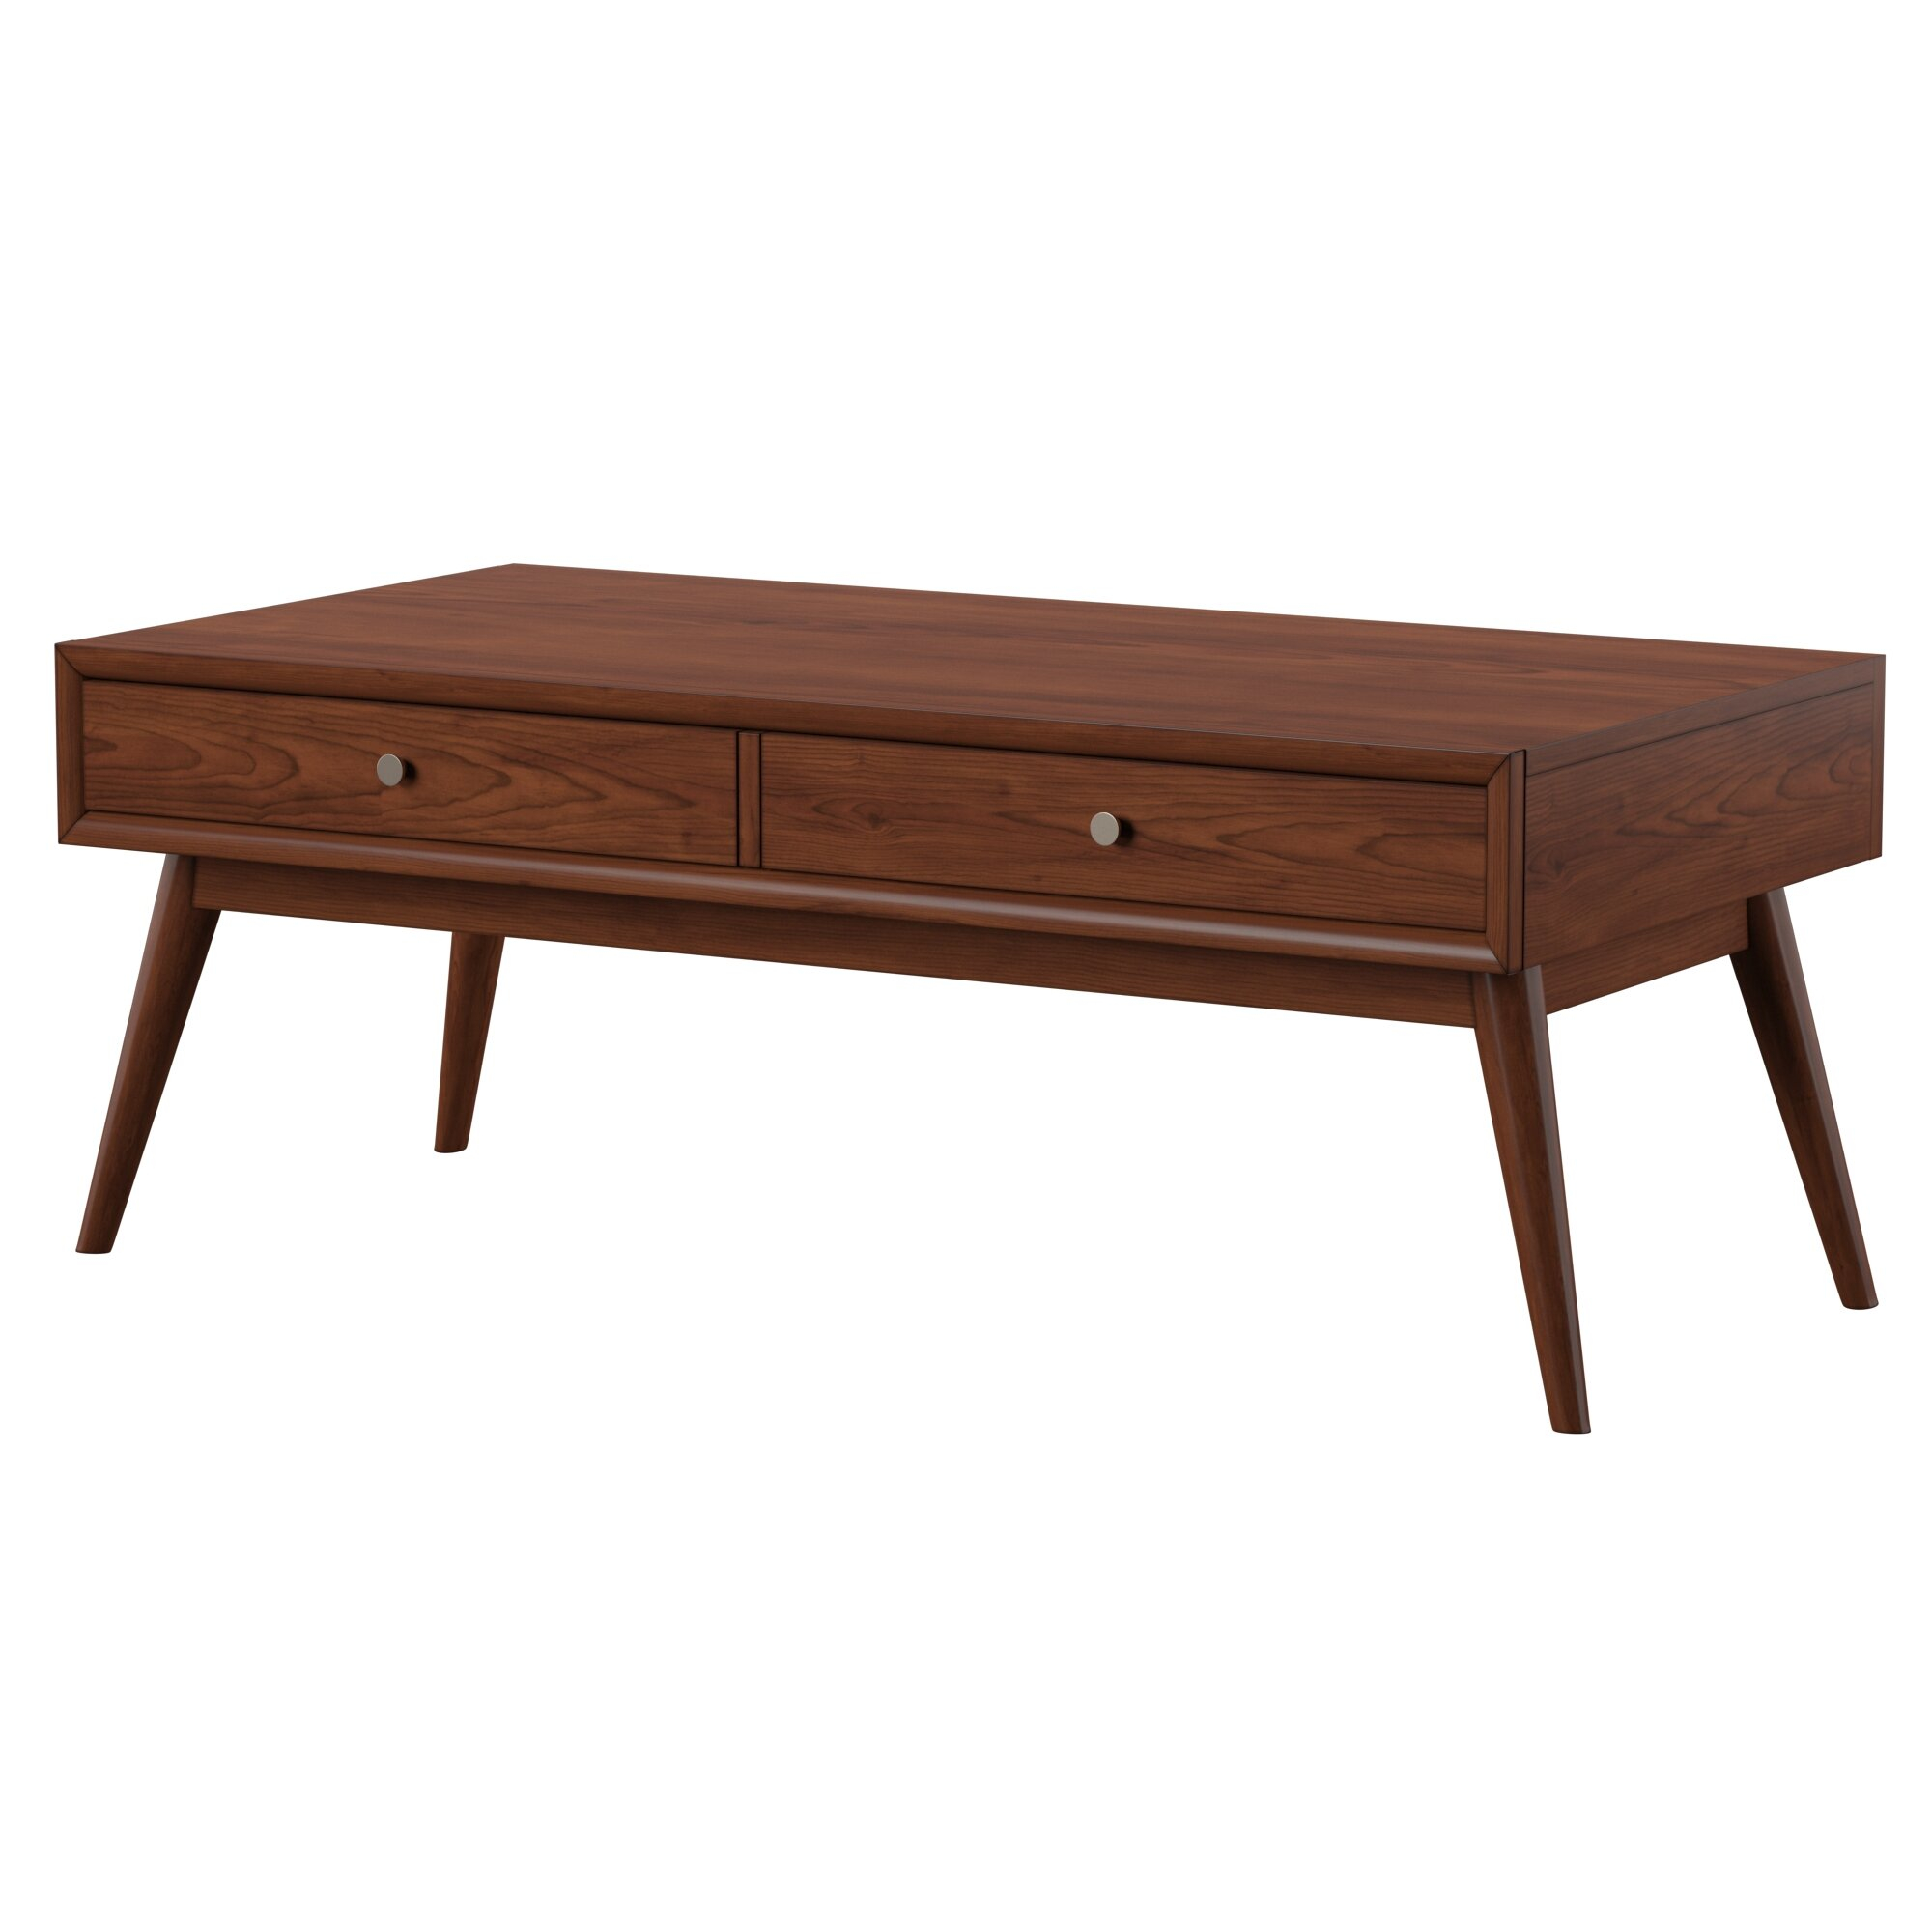 Norberg Coffee Table With Storage Allmodern pertaining to size 2000 X 2000